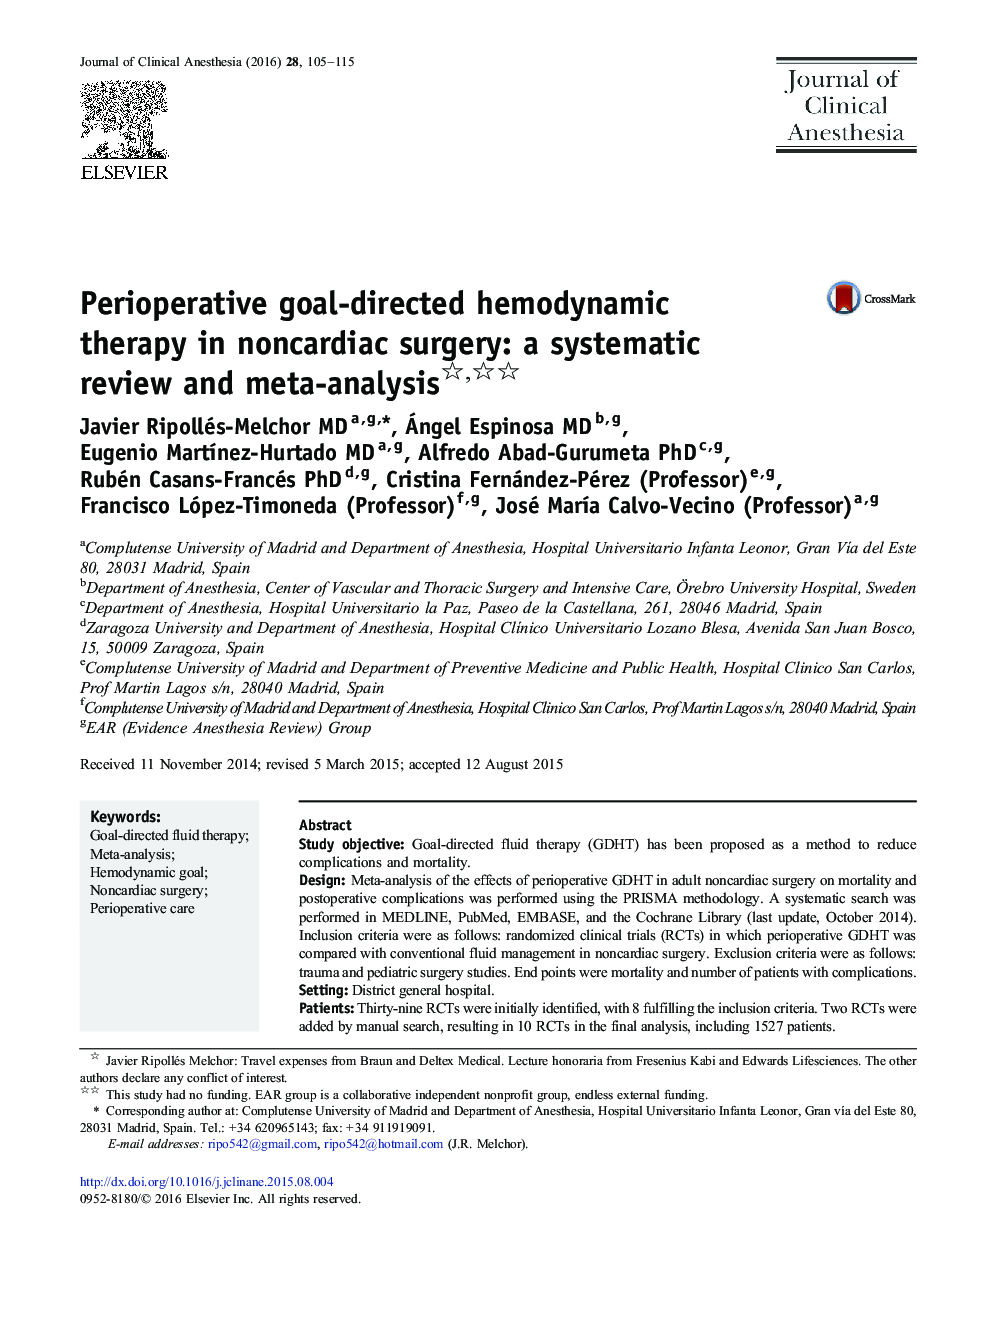 Perioperative goal-directed hemodynamic therapy in noncardiac surgery: a systematic review and meta-analysis 